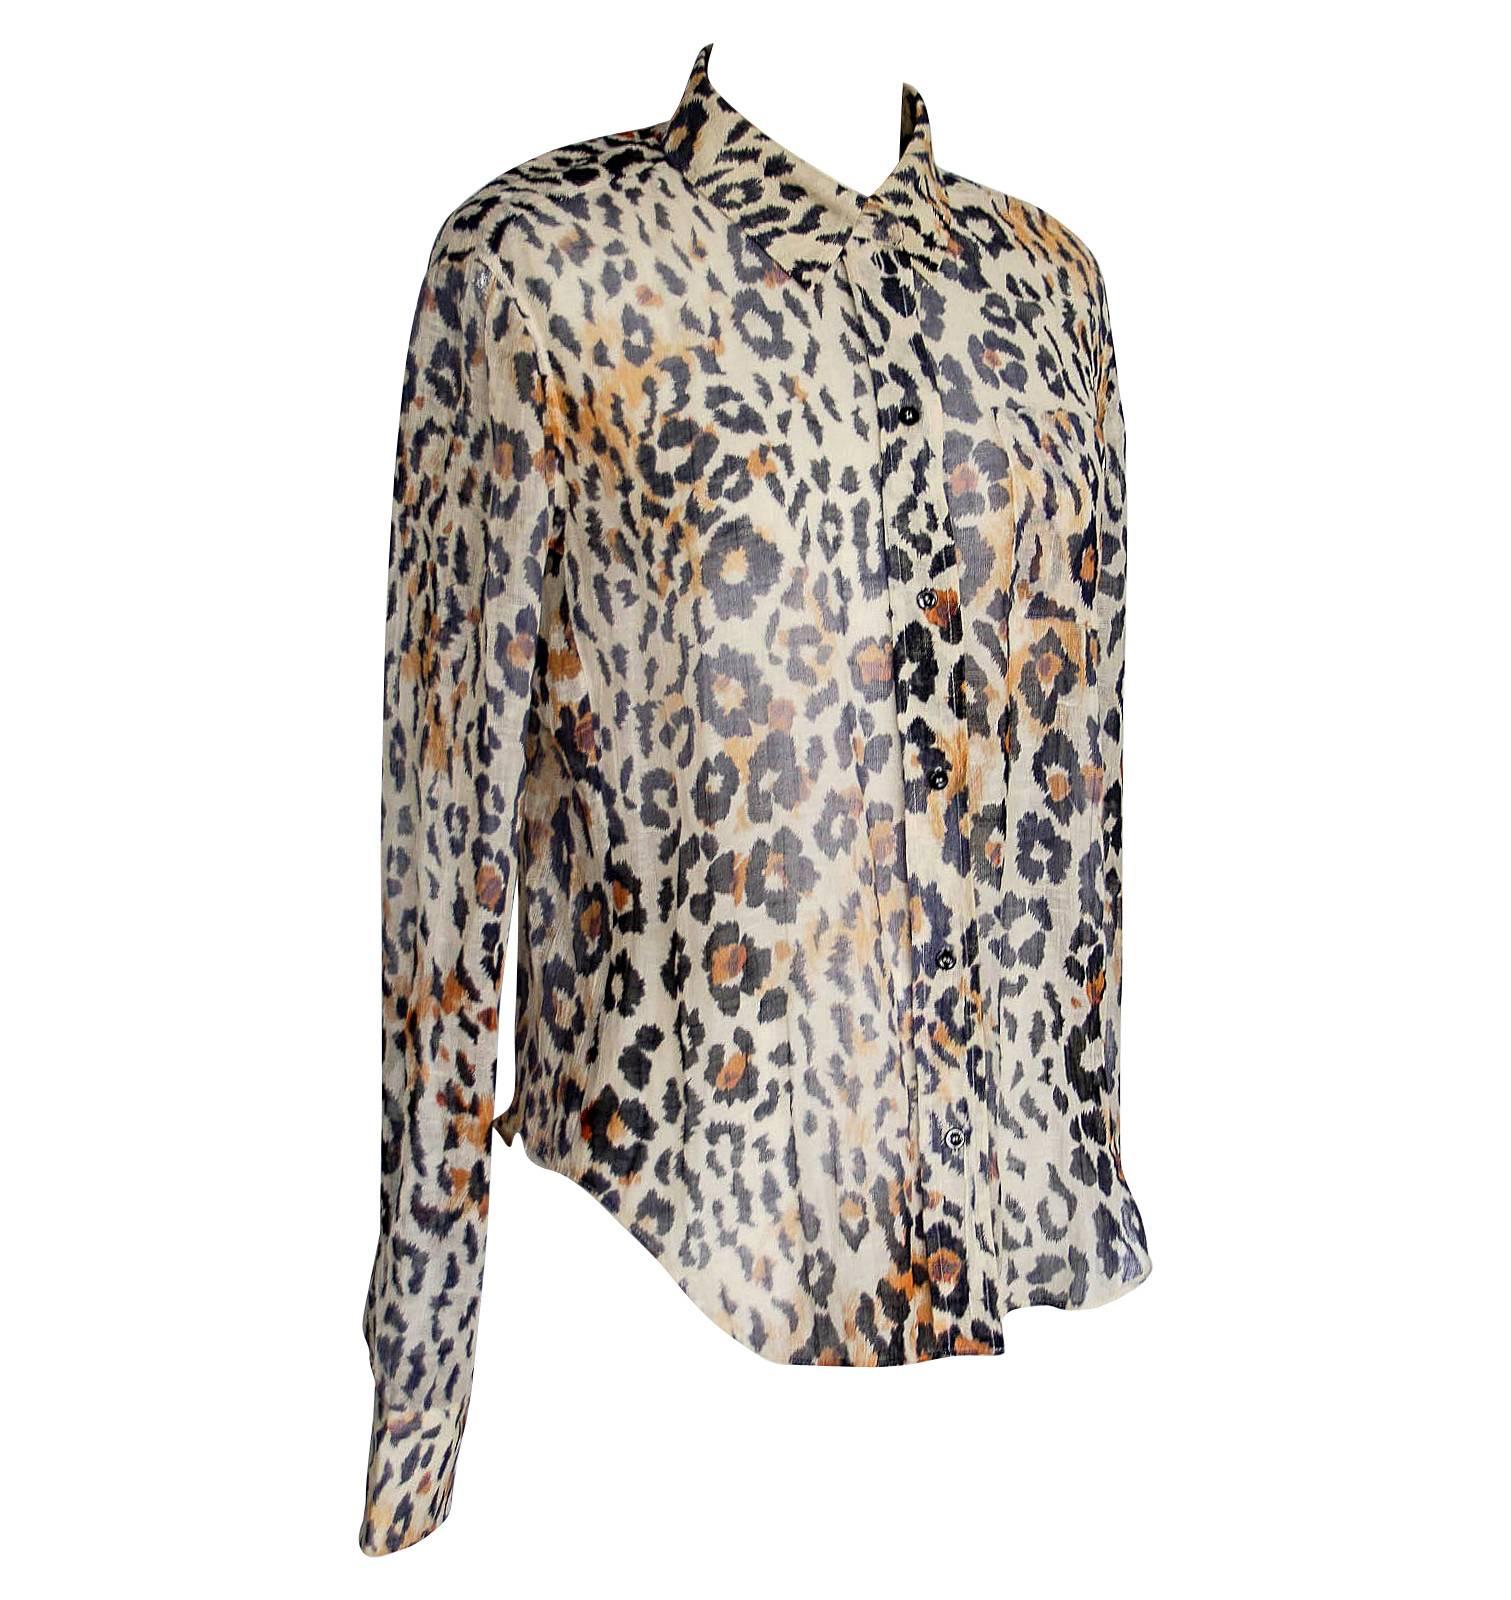 Guaranteed authentic Chloe chic leopard print top. 
Chloe flax coloured top with leopard print.
Open weave linen and cotton blend.
Rear pleat with 2 buttons on each cuff. 
final sale

SIZE 38
USA SIZE 4

TOP MEASURES: 
LENGTH  28